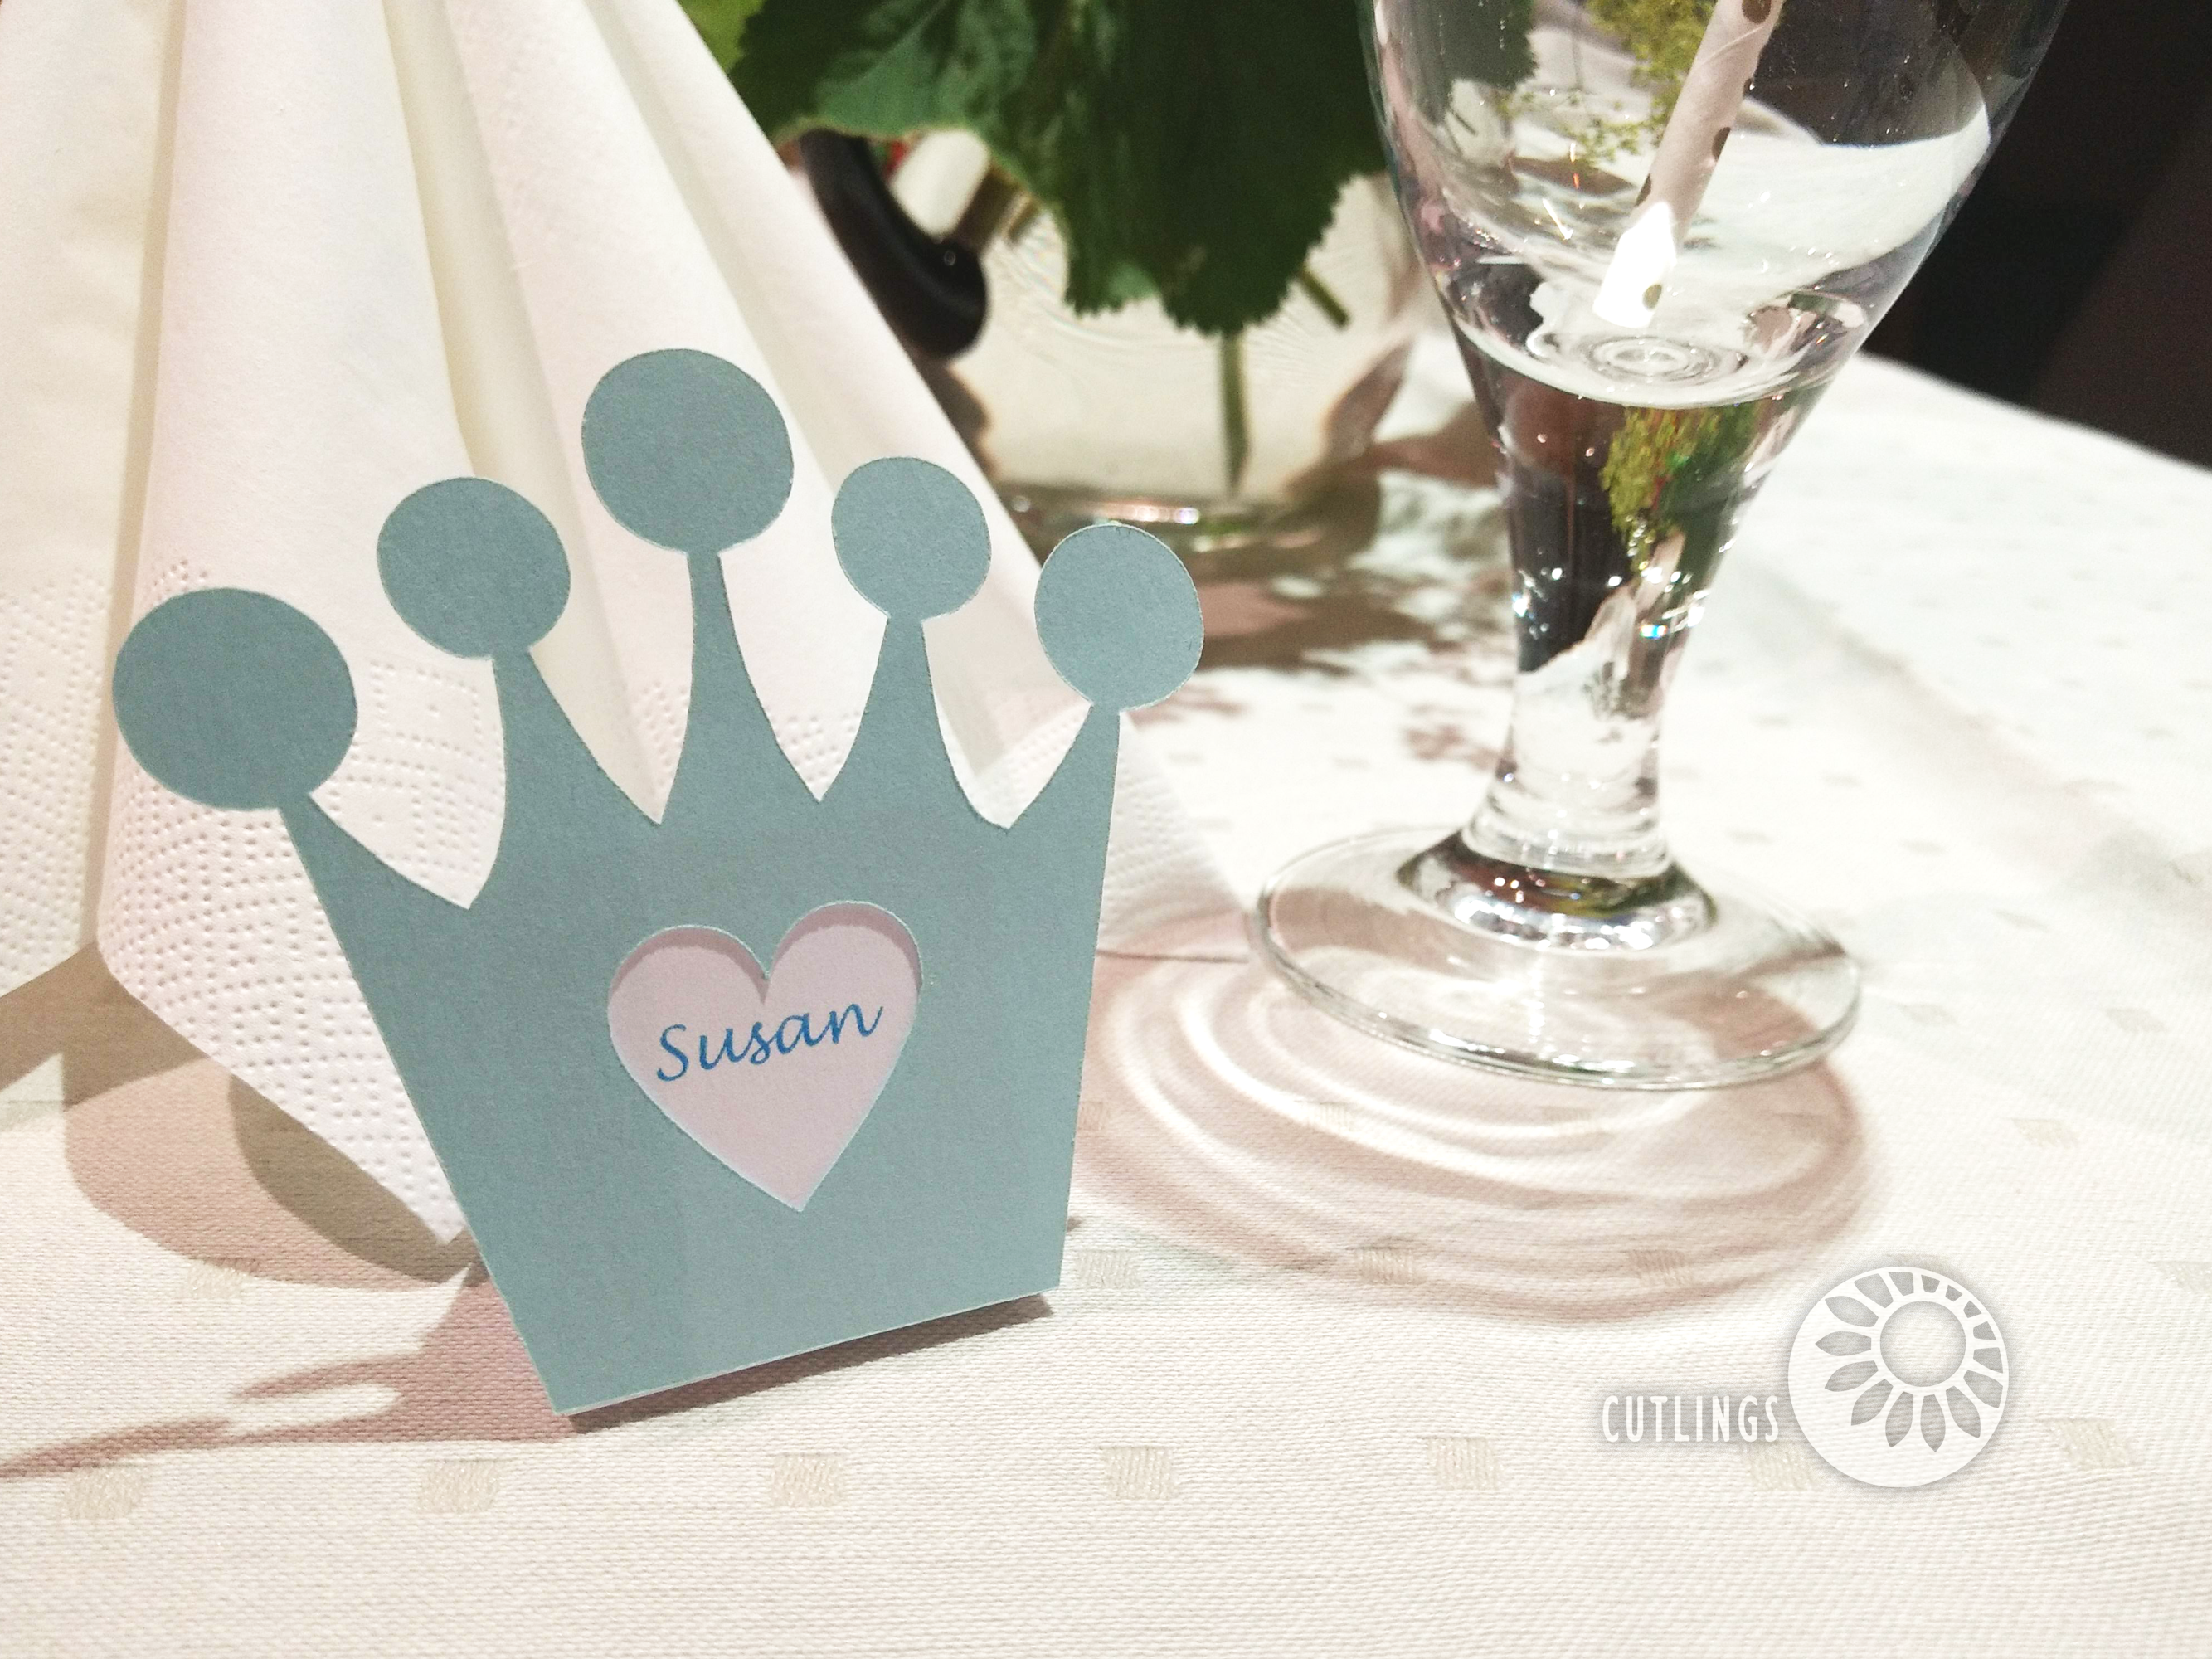 Table place card - one crown for each guest